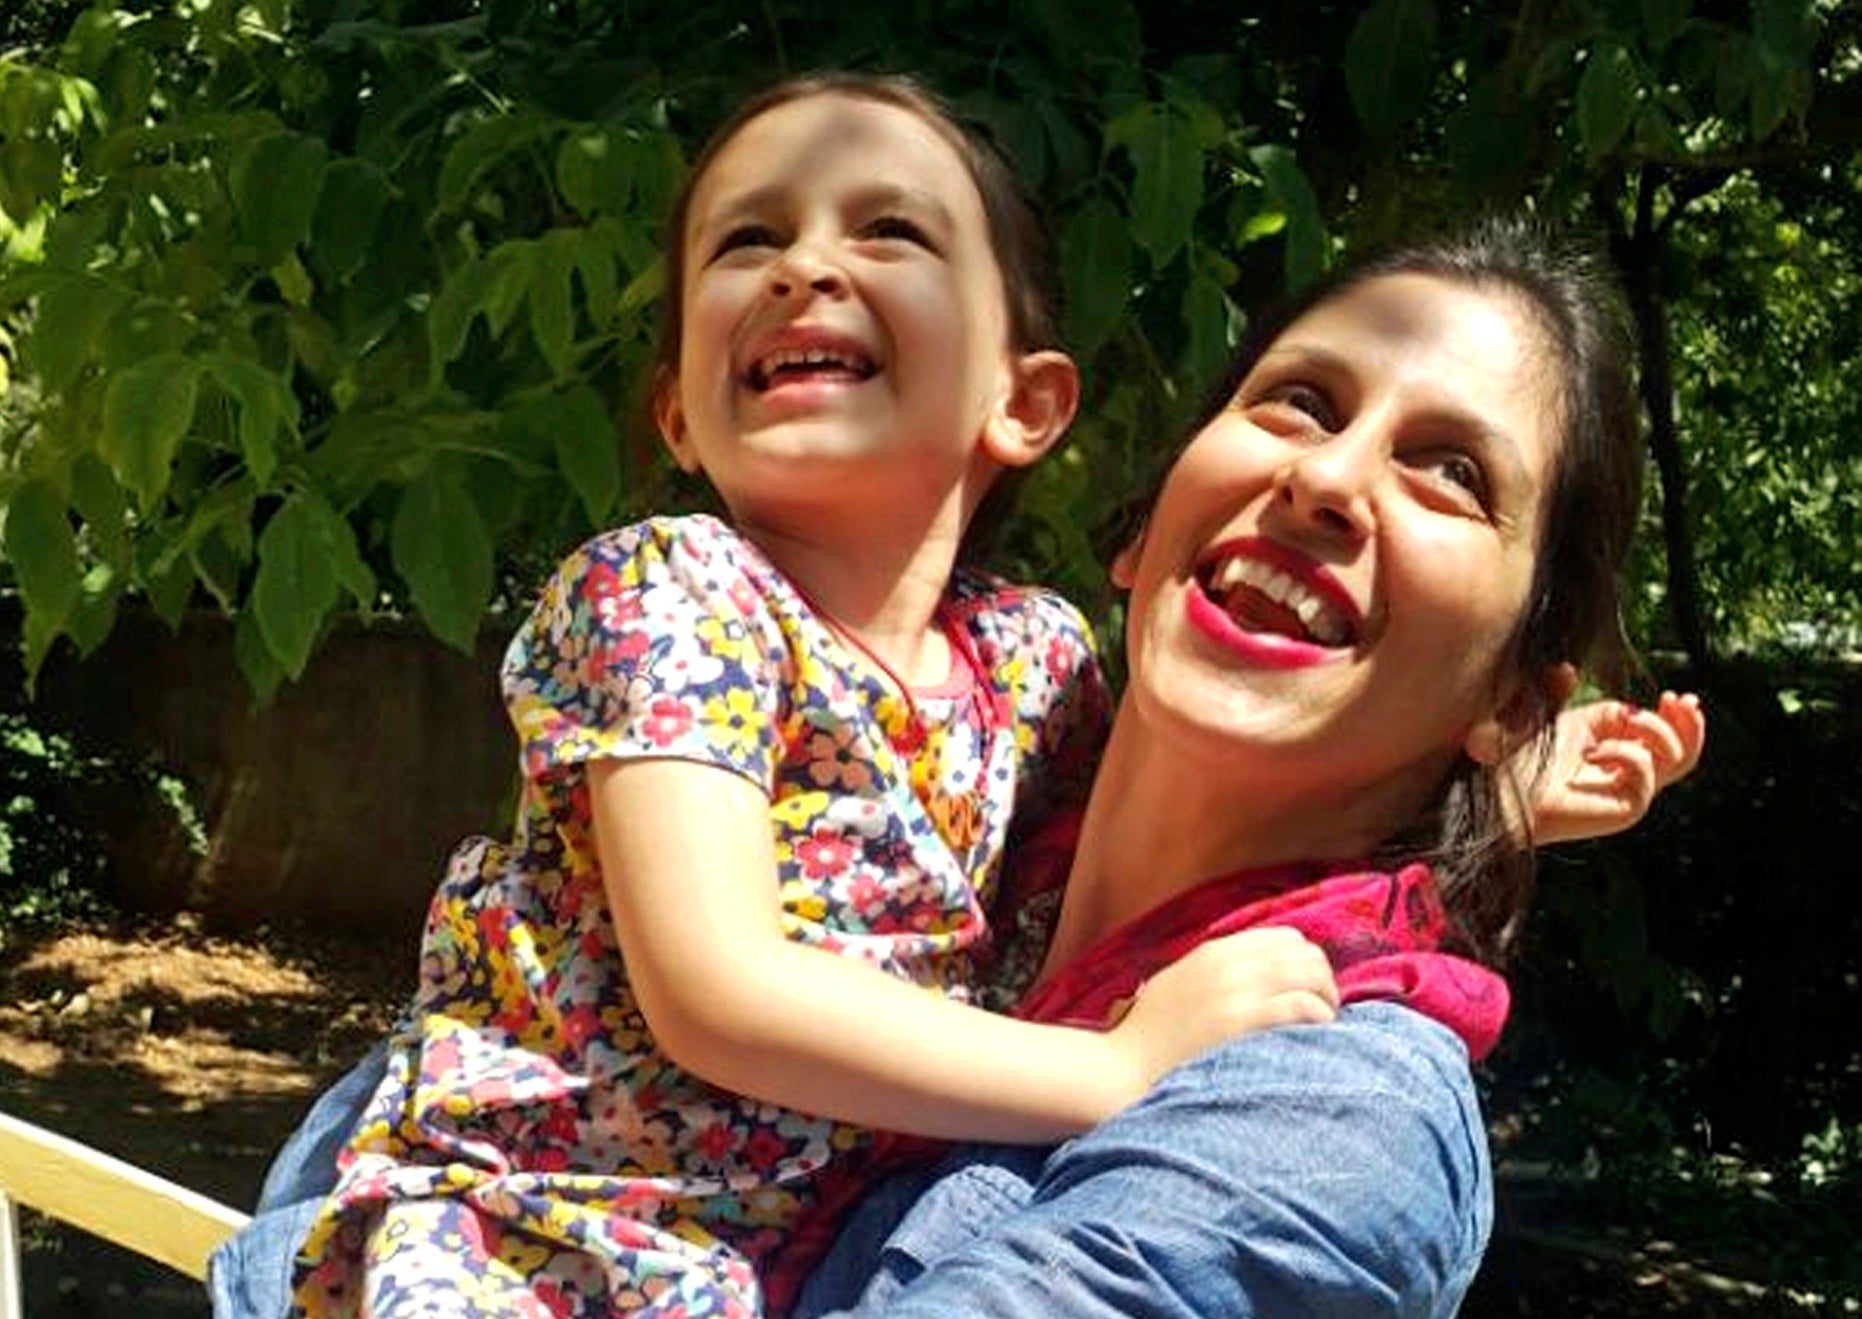 Nazanin Zaghari-Ratcliffe was reunited with her daughter Gabriella for just three days before being returned to prison in Iran